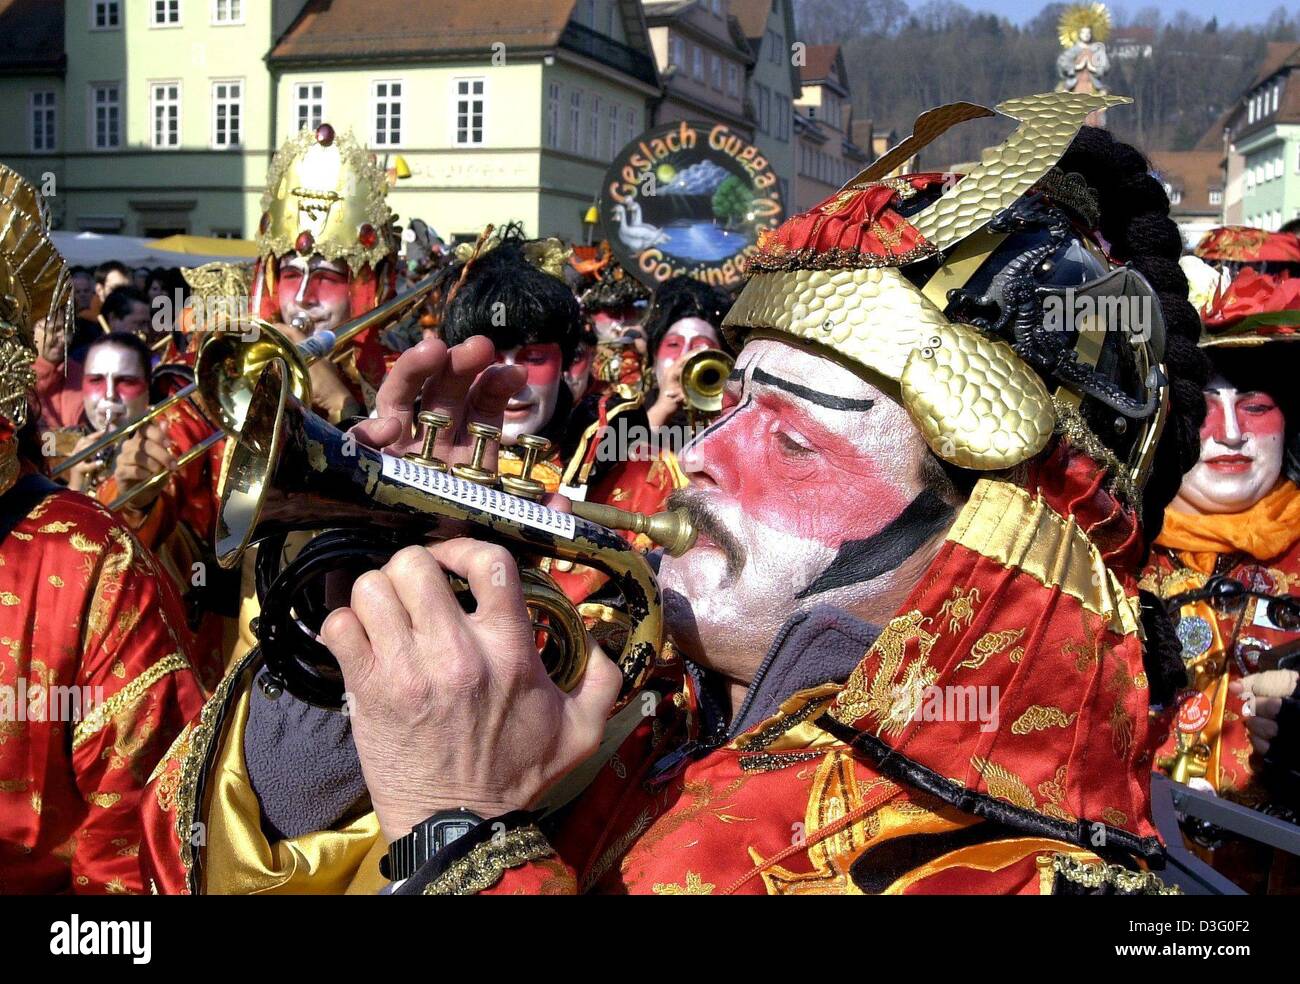 dpa) - Carnival enthusiasts dressed up in Japanese costumes play Guggen  music as they march through the streets of Schwaebisch Gmuend, southern  Germany, 22 February 2003. 'Gugaaggeri Musig' is originally a characteristic